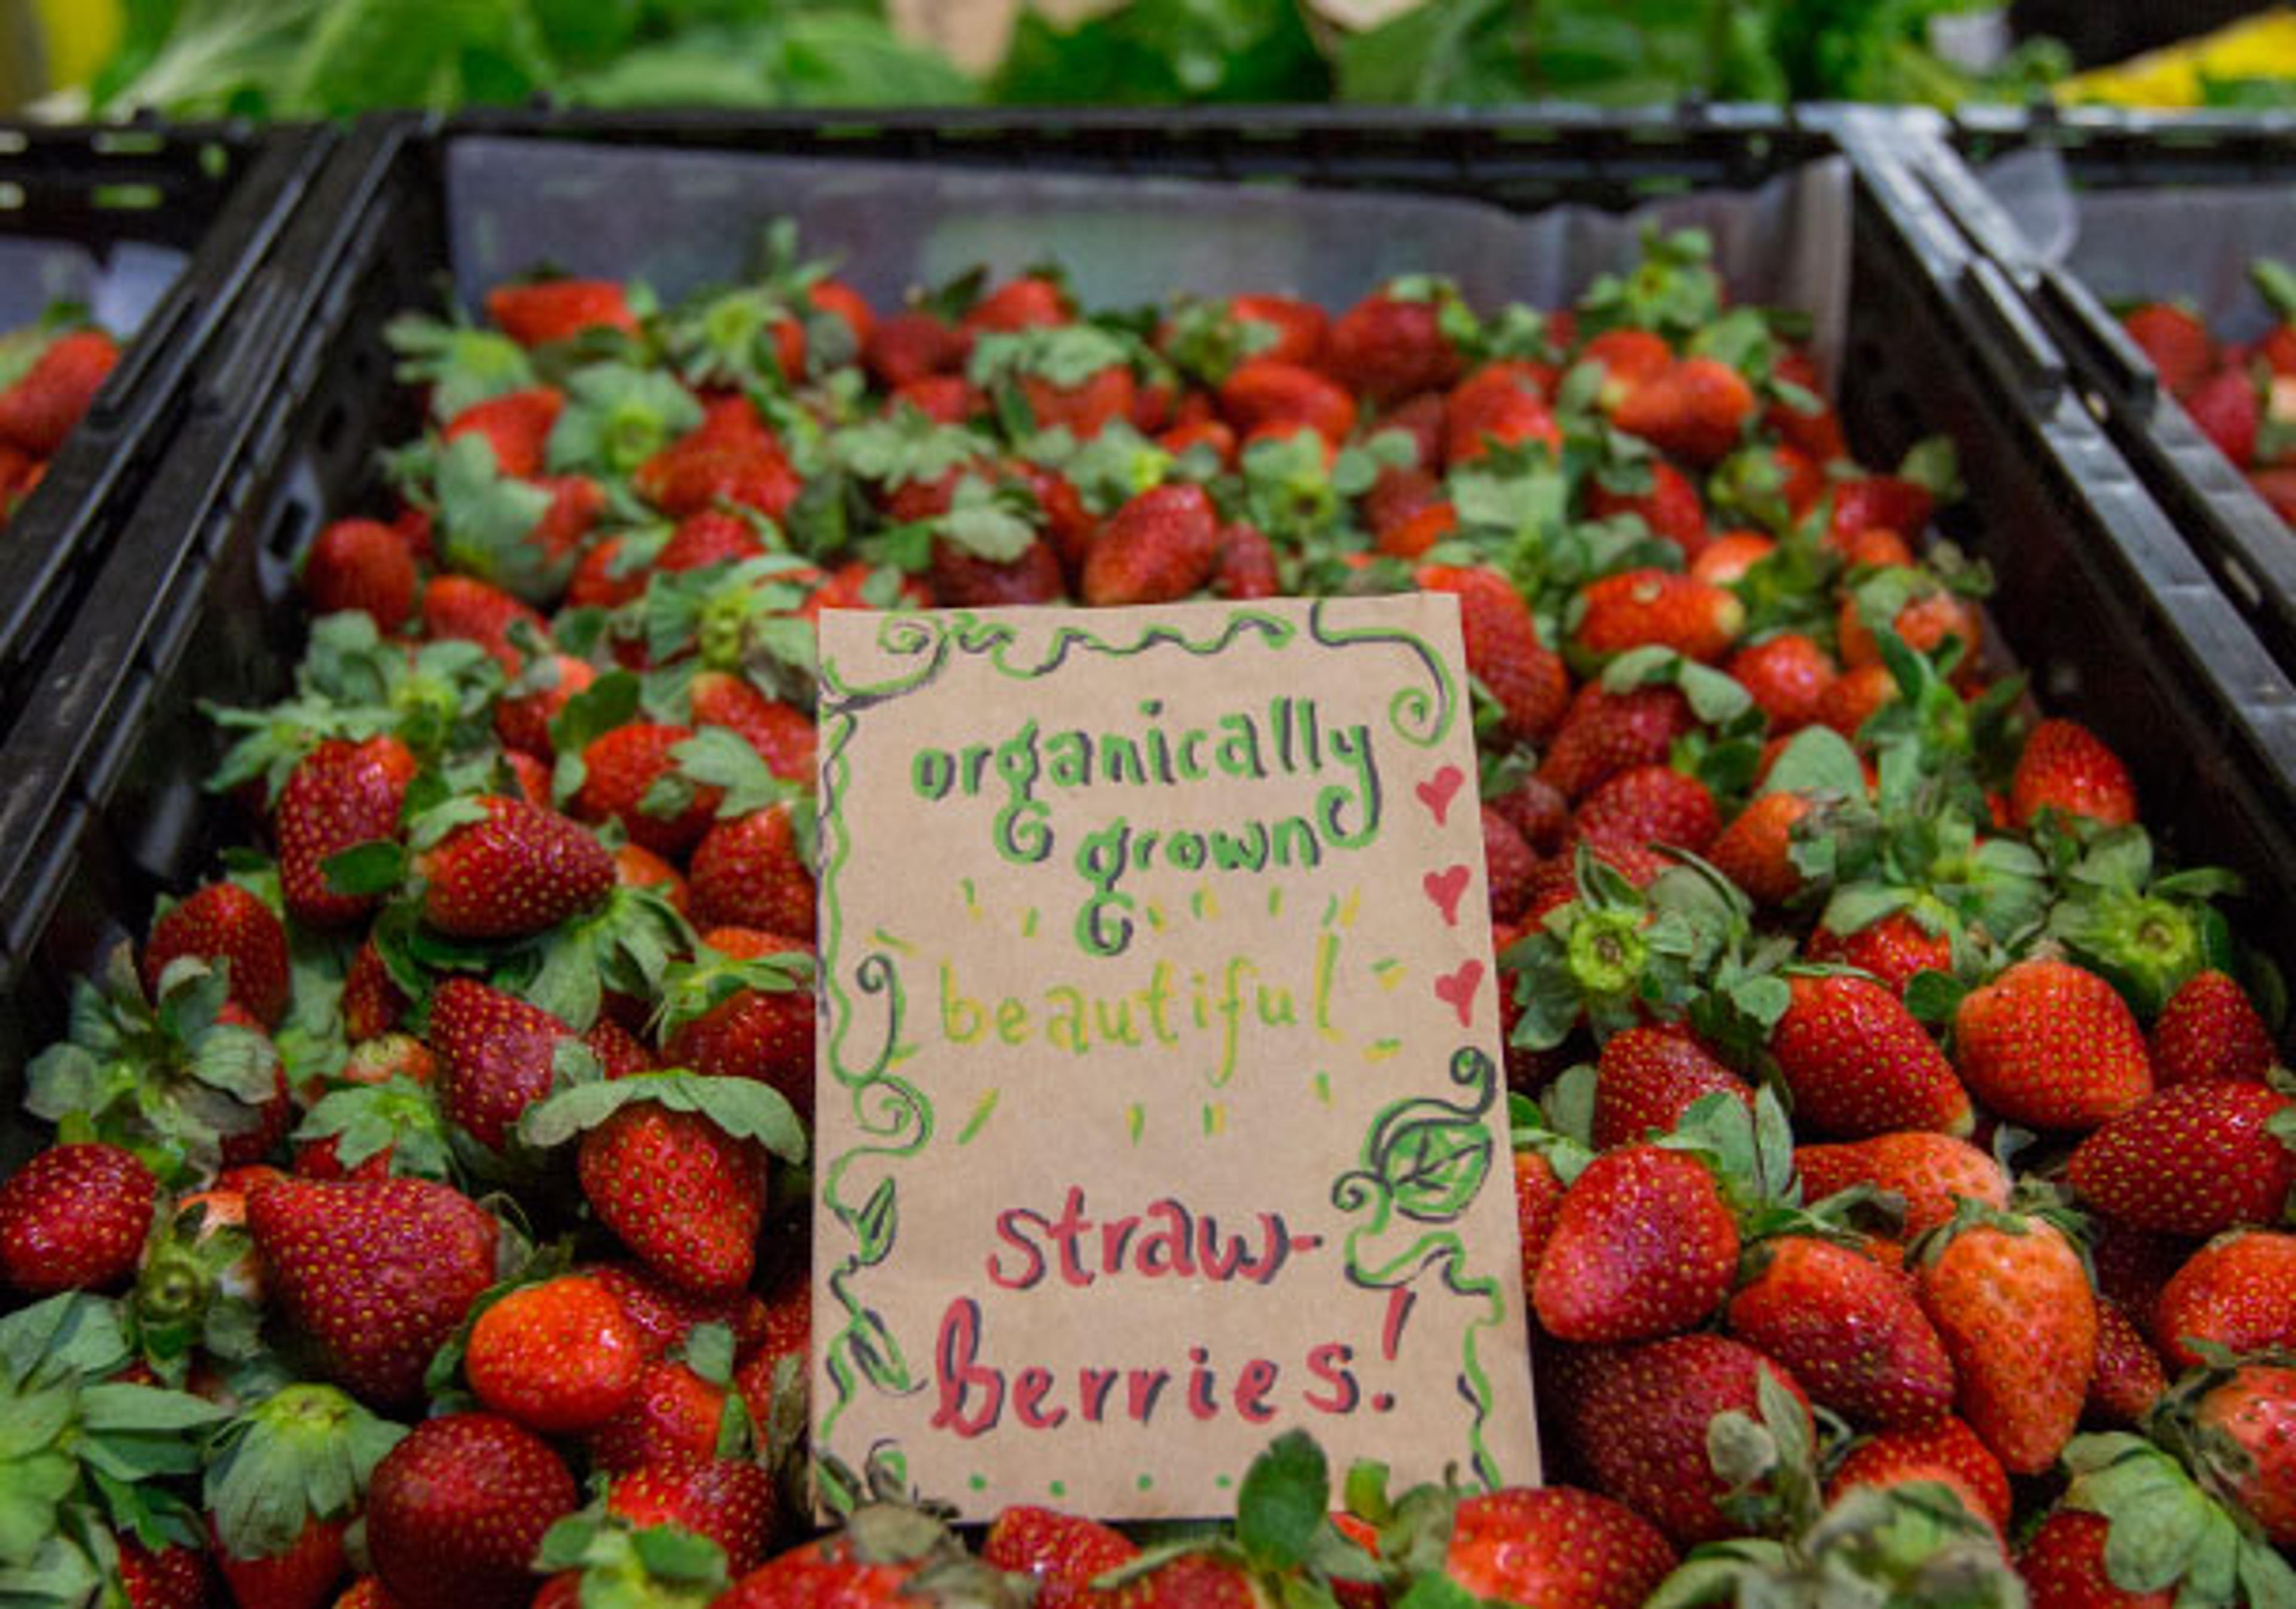 A tub of strawberries with a colourful, hand written cardboard sign in the middle that says "organically grown, beautiful strawberries!" 